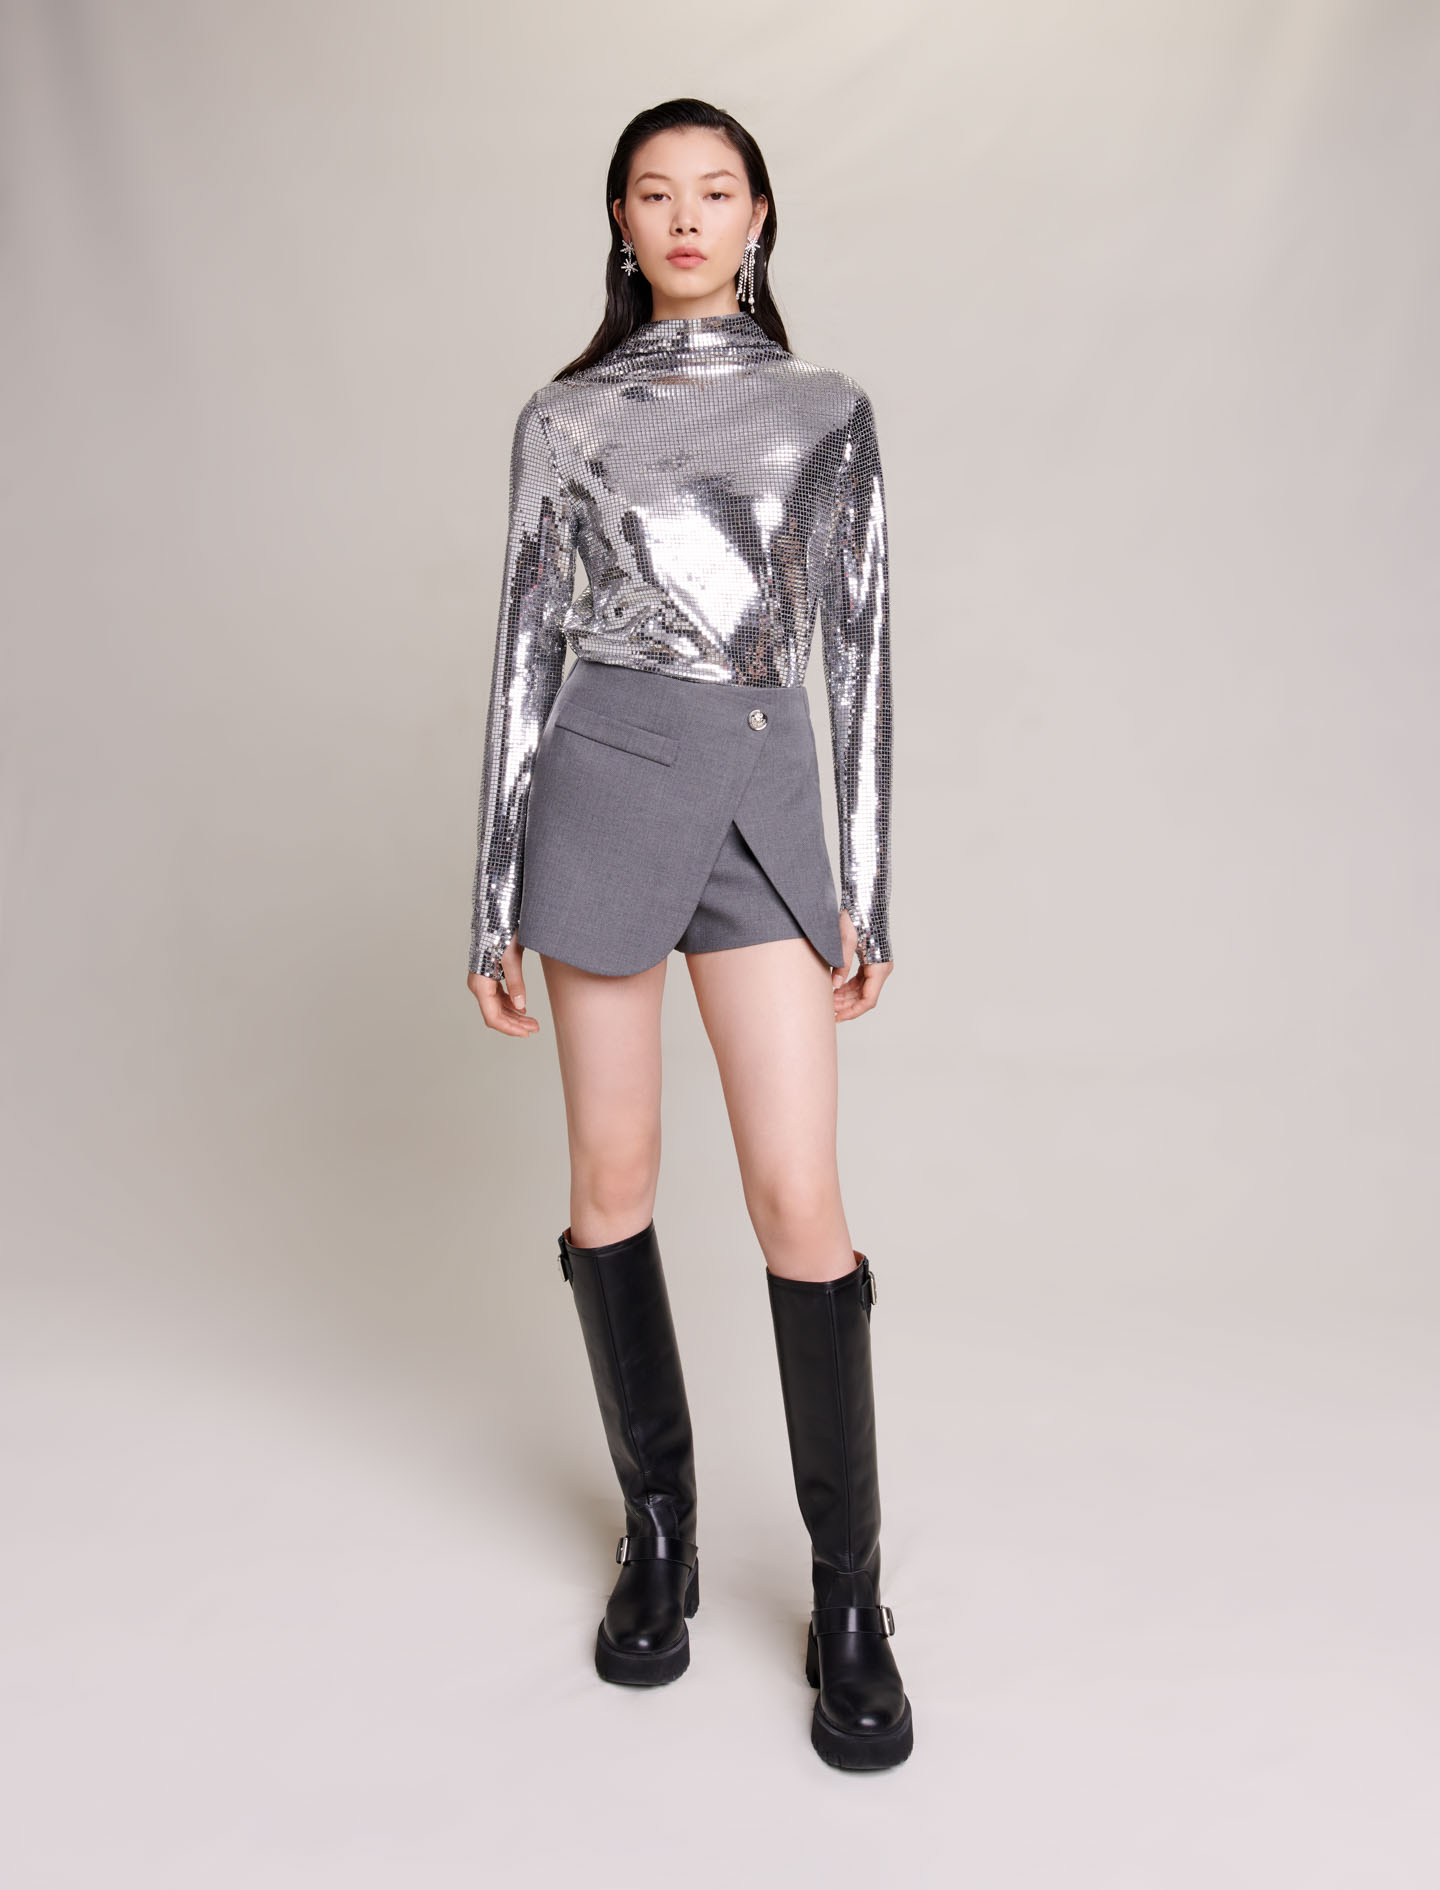 Maje Woman's polyamide, Glittery top for Fall/Winter, in color Silver / Grey